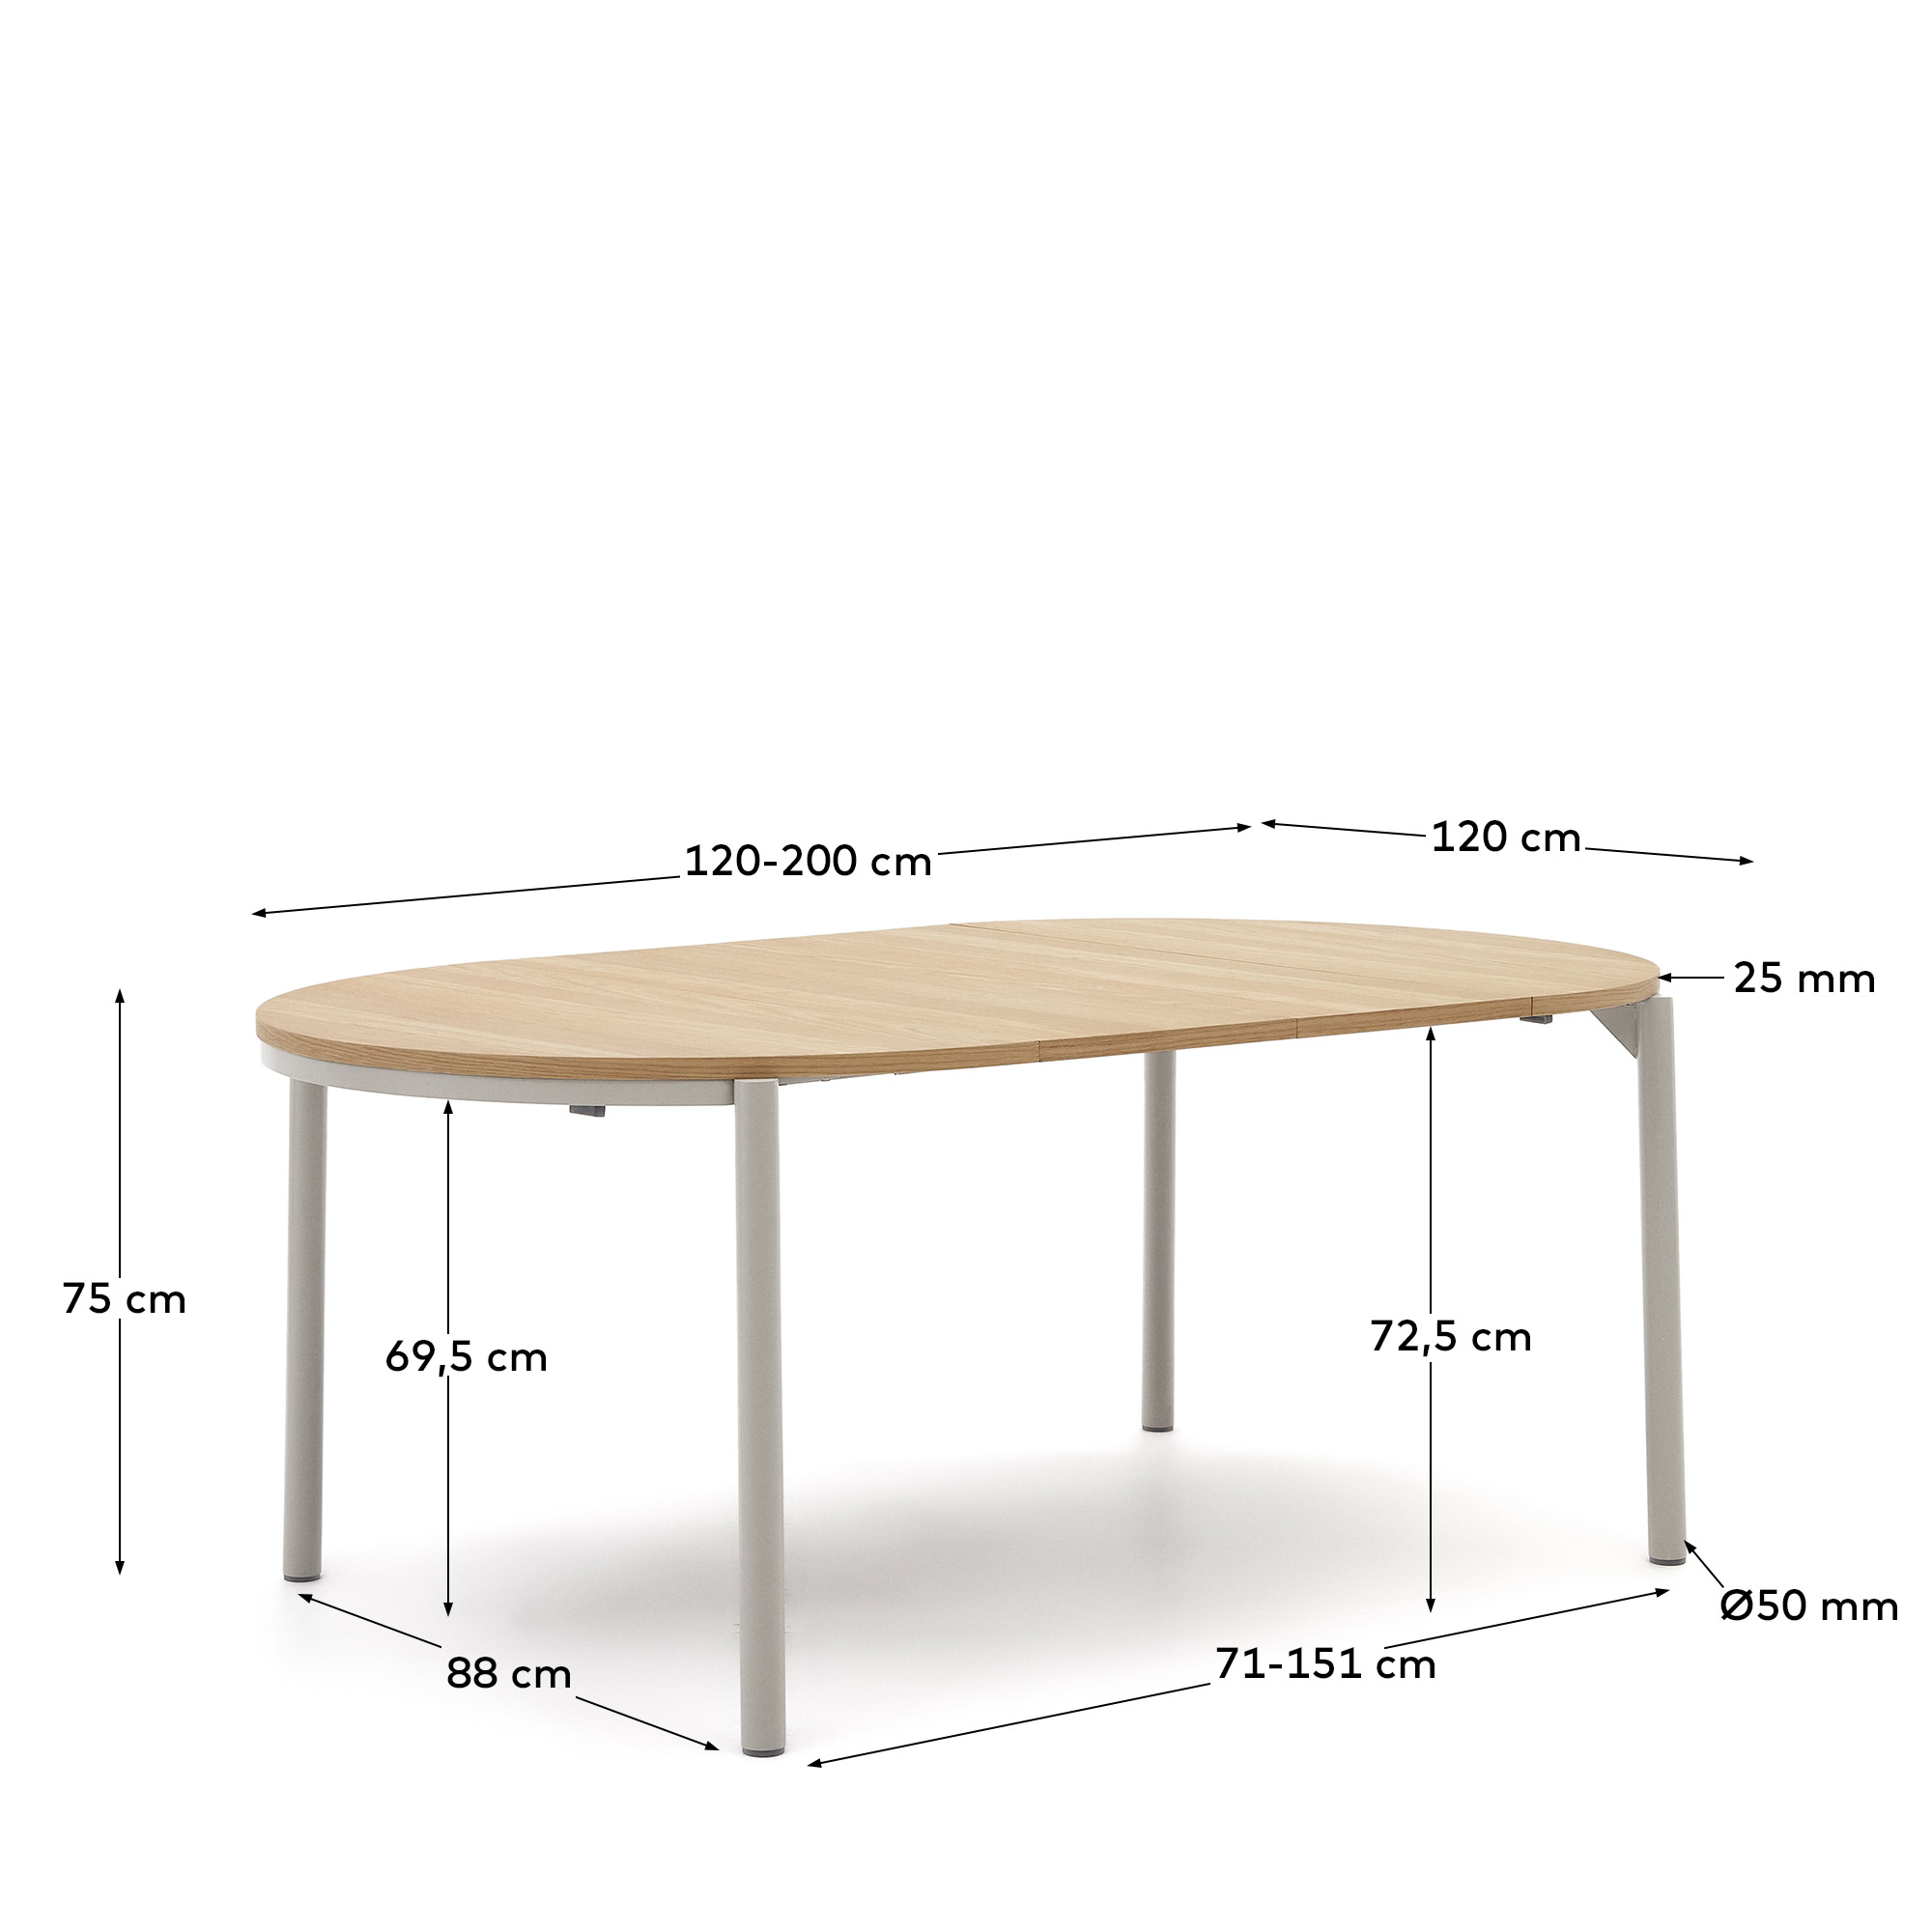 Montuiri extendable round table in oak veneer and steel legs with grey finish, Ø 120 (200) cm - sizes